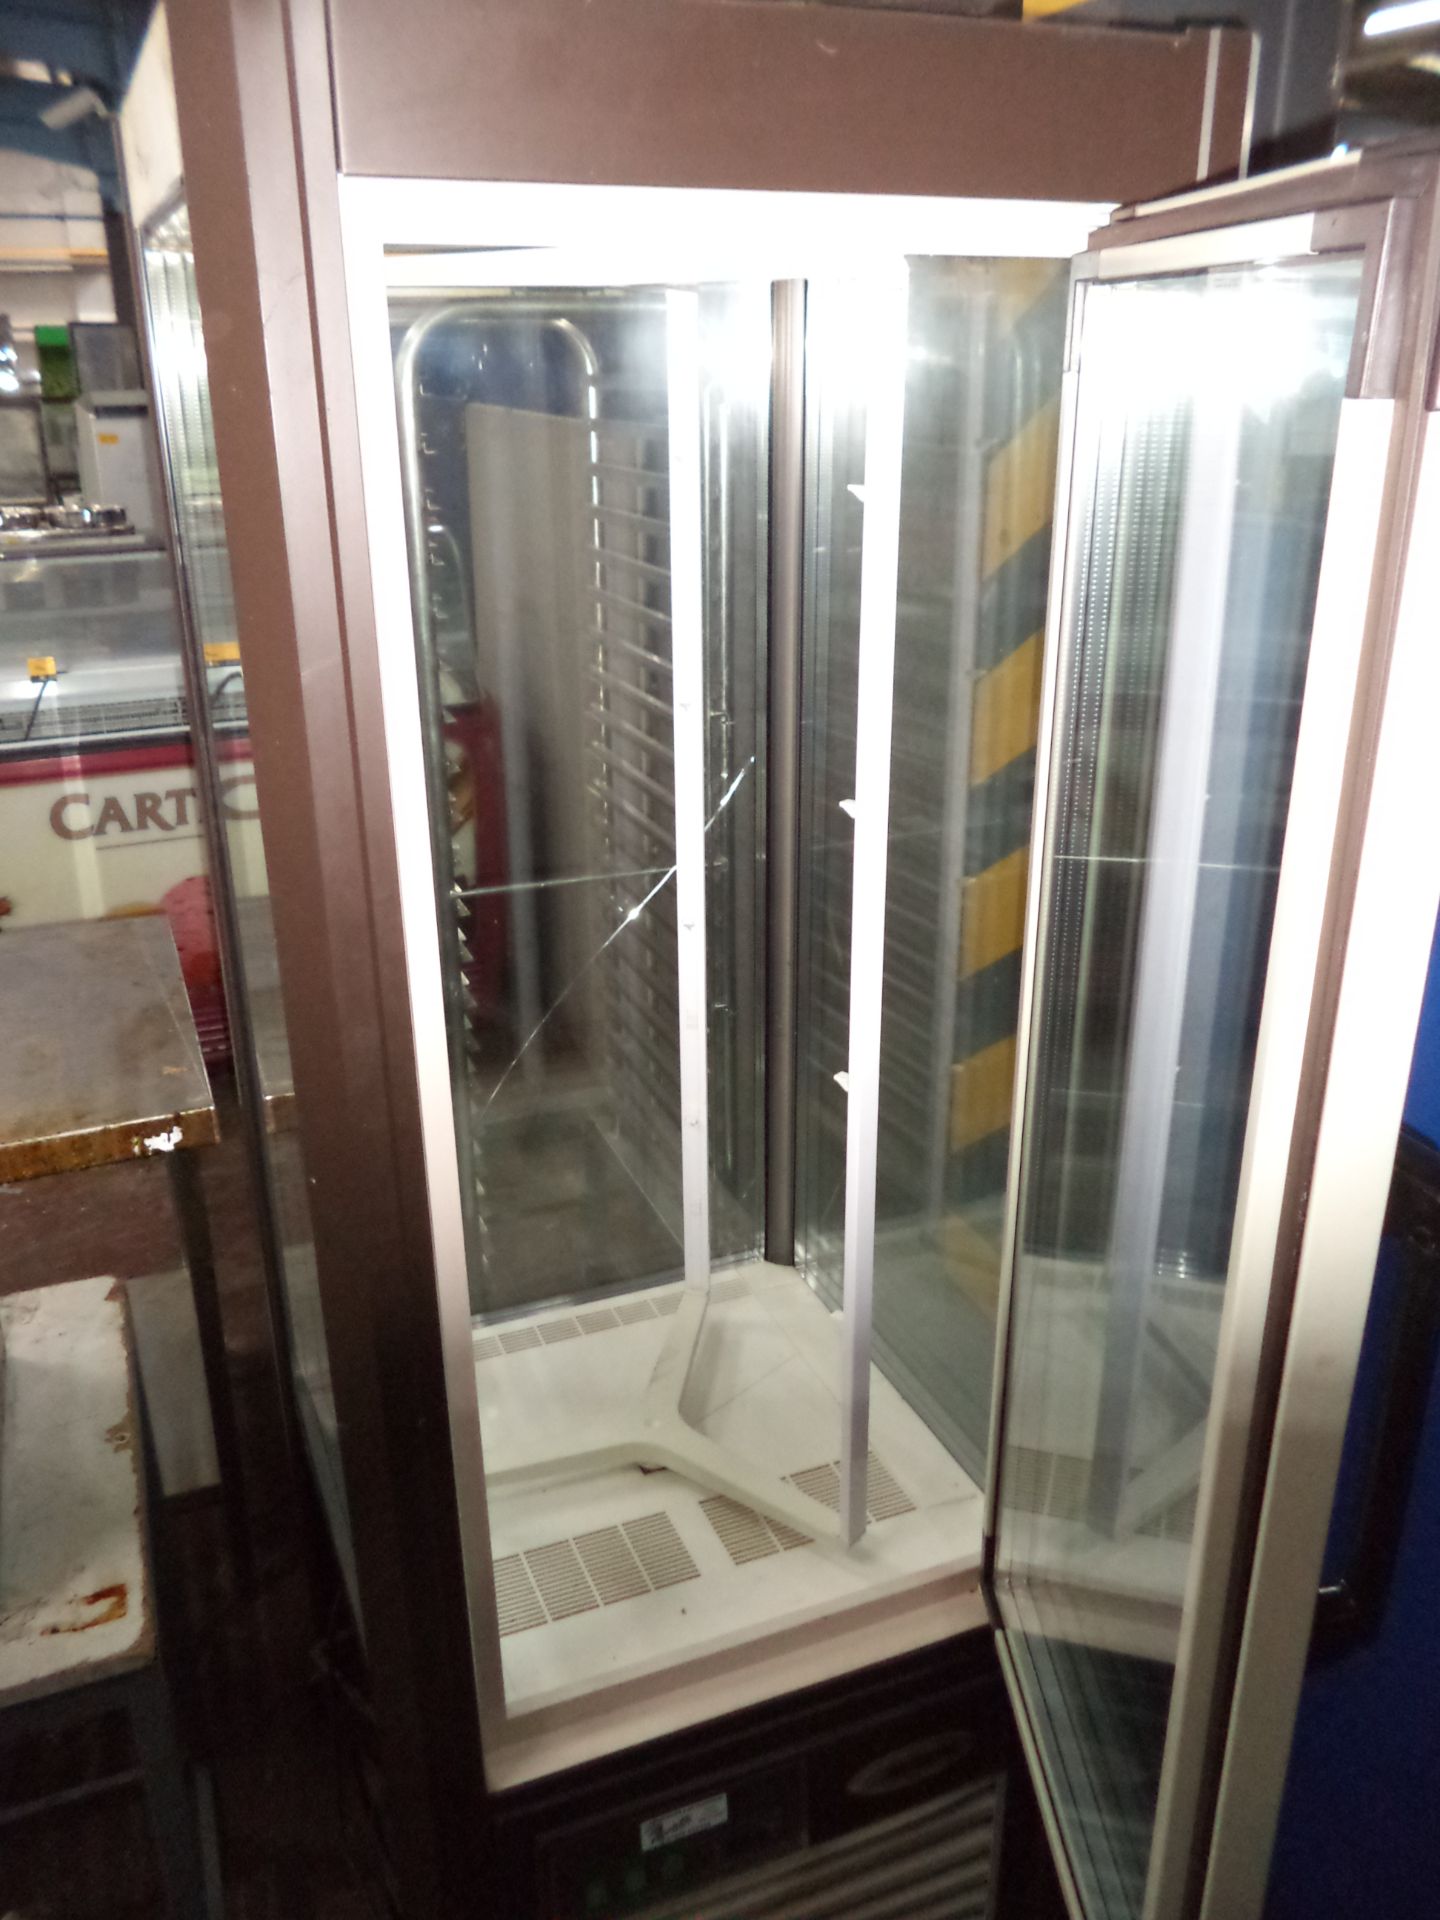 Scaiola large pastry display fridge NB cracked glass to one panel IMPORTANT: Please remember goods - Image 4 of 6